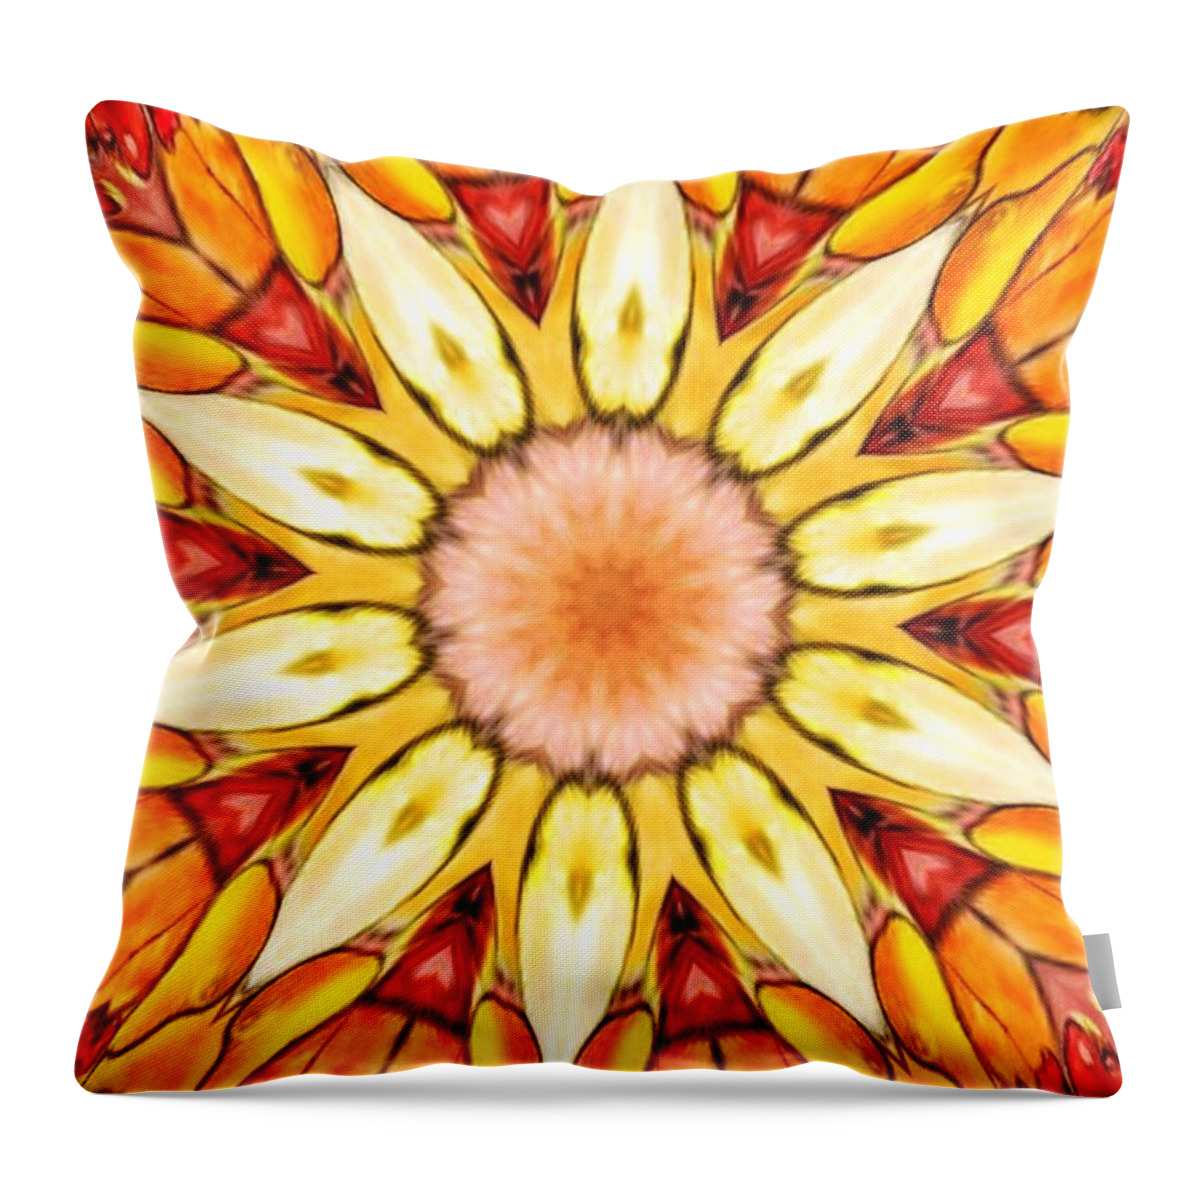 Fractal Throw Pillow featuring the photograph Sunbloom by Nick Heap